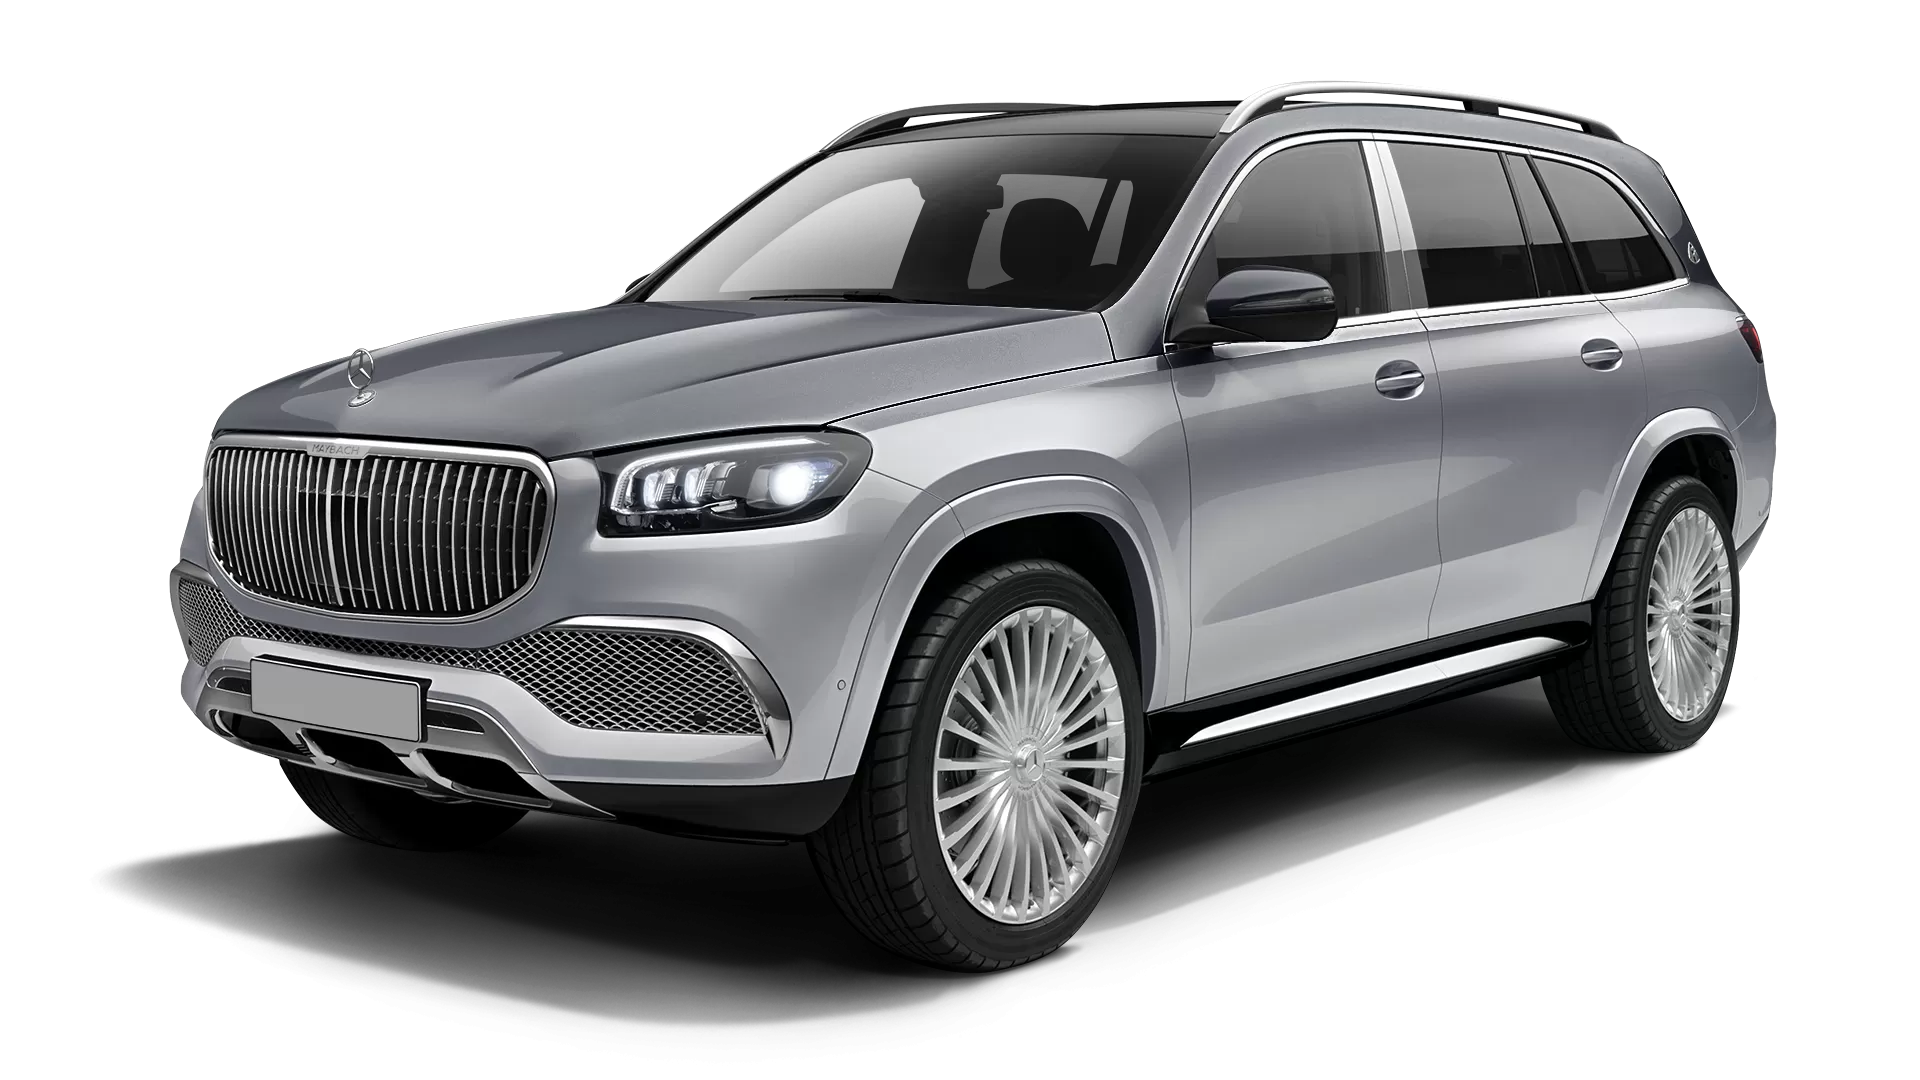 Mercedes Maybach GLS 600 stock front view in High Tech Silver & Selenite Grey color